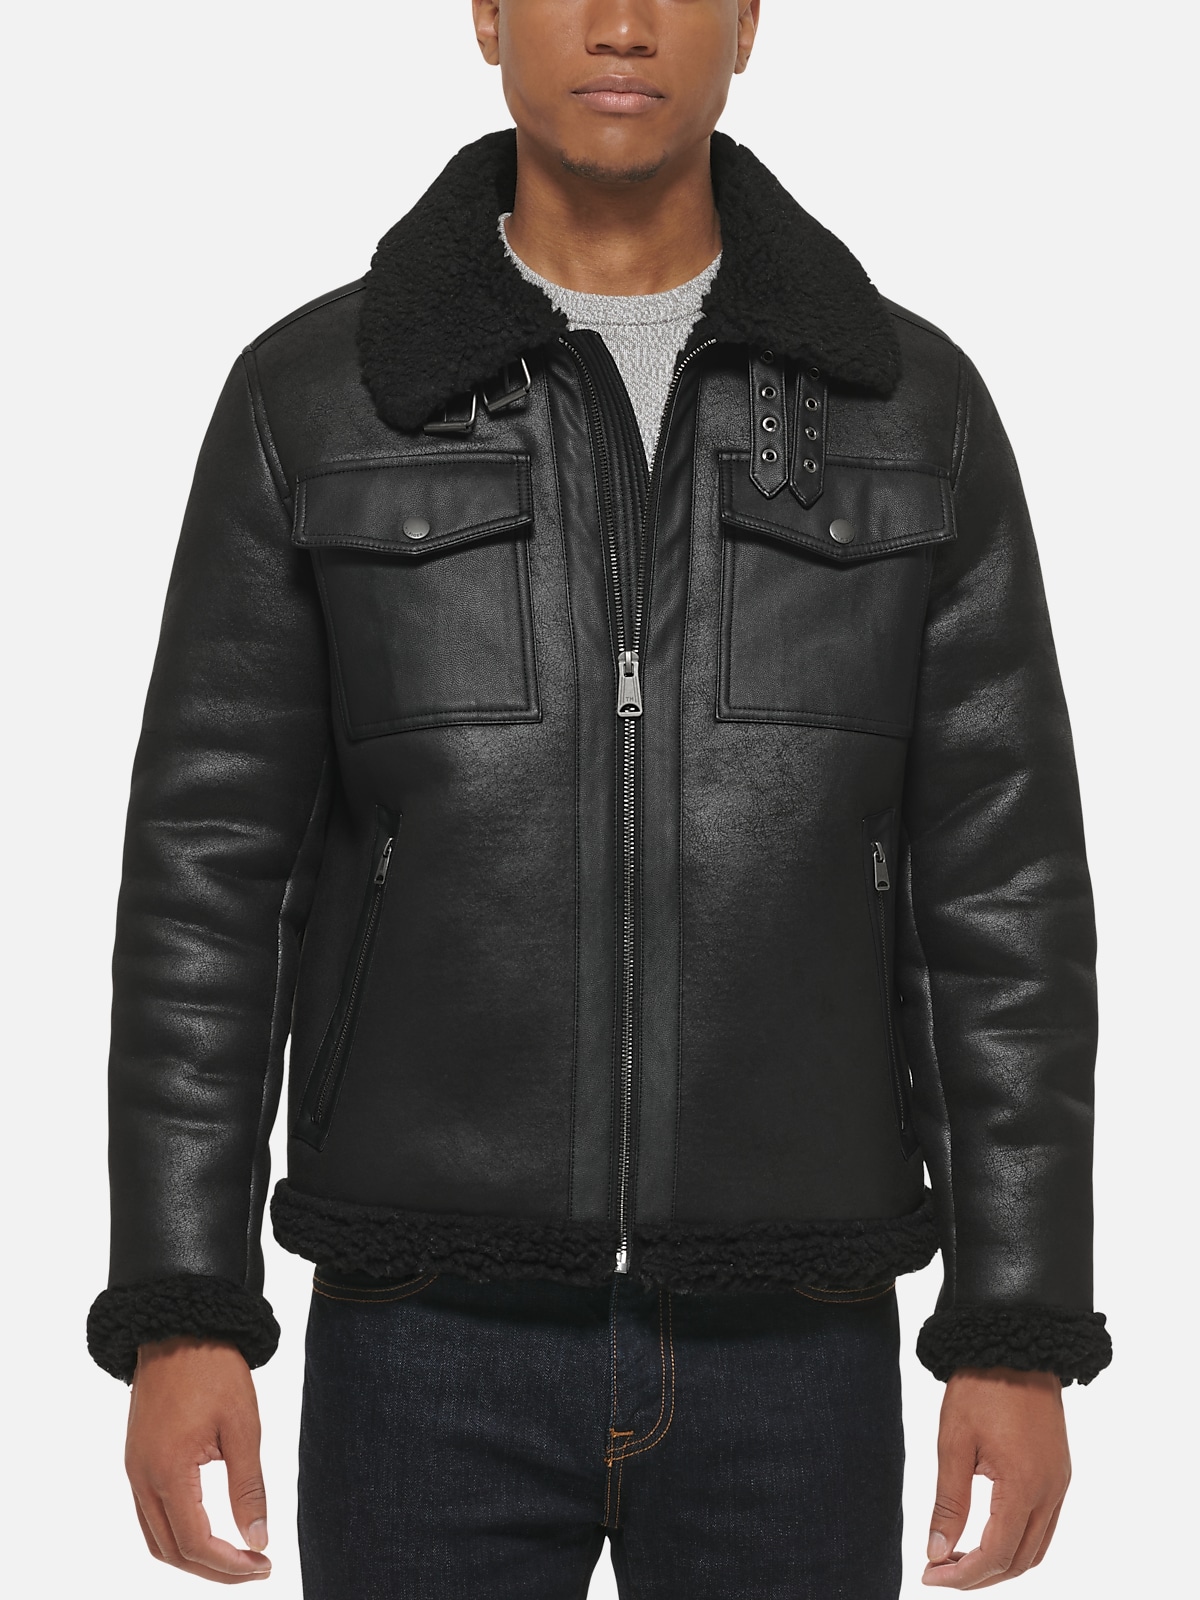 Tommy Hilfiger Modern Fit Leather and Shearling Aviator Jacket | All Sale| Men's Wearhouse